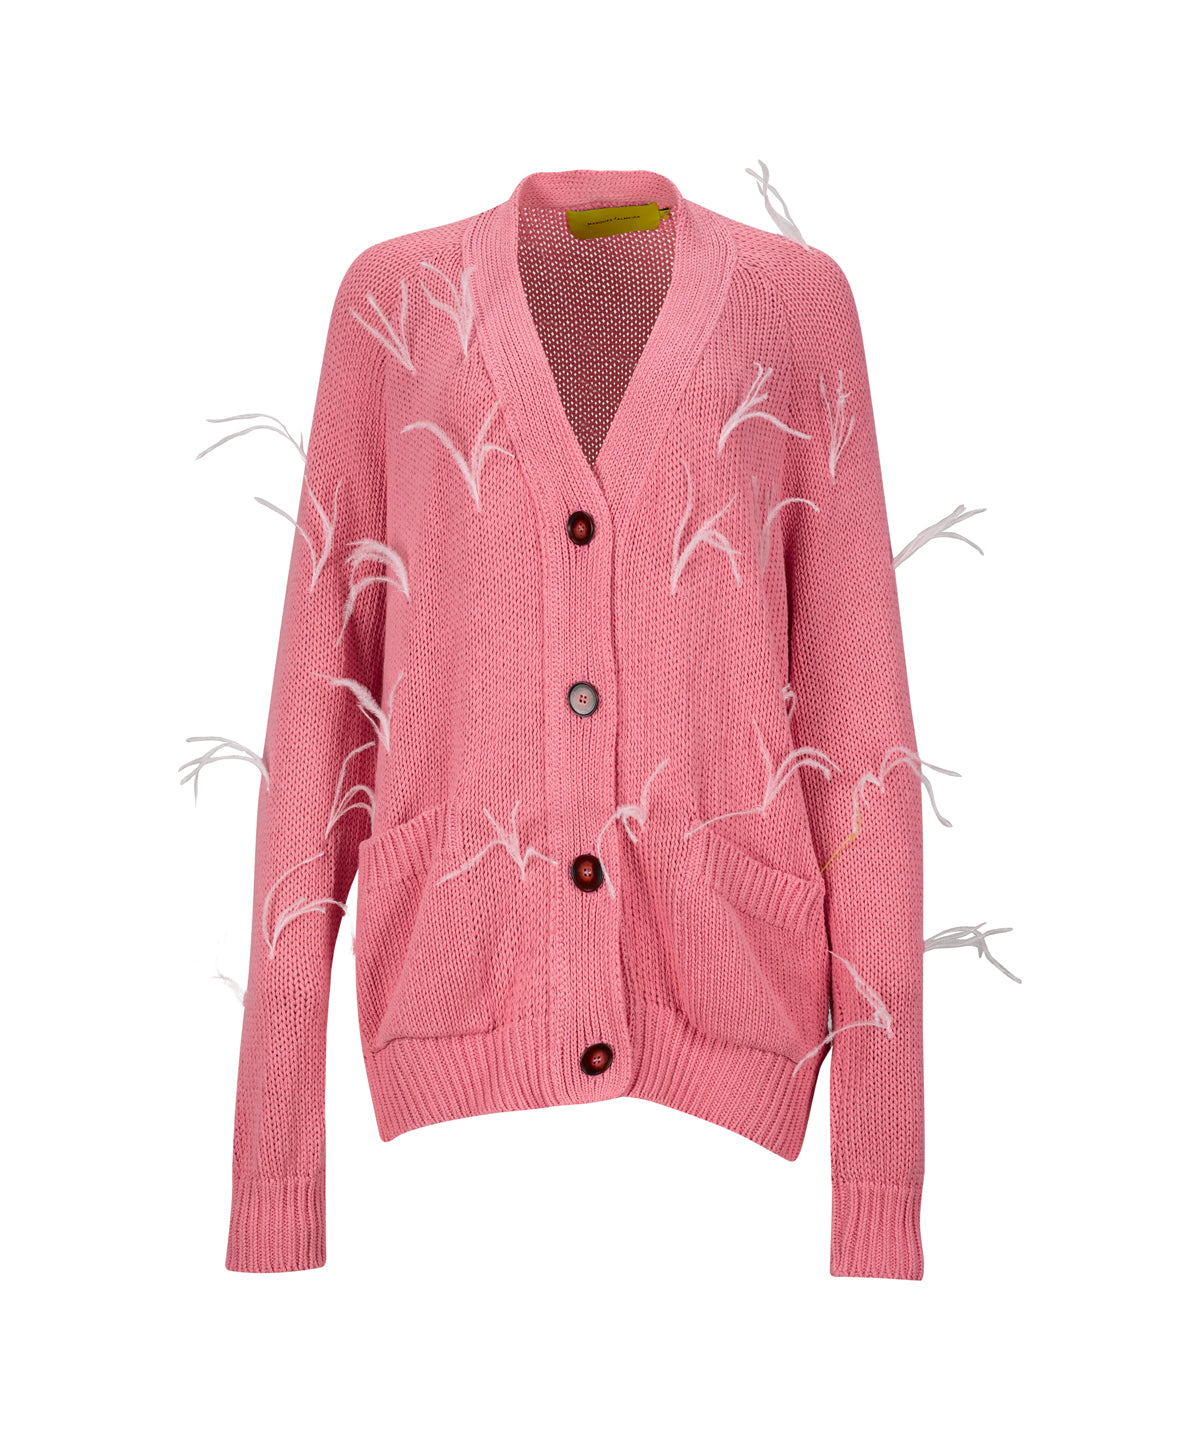 PINK OVERSIZED CARDIGAN WITH FEATHERS PULLS marques almeida